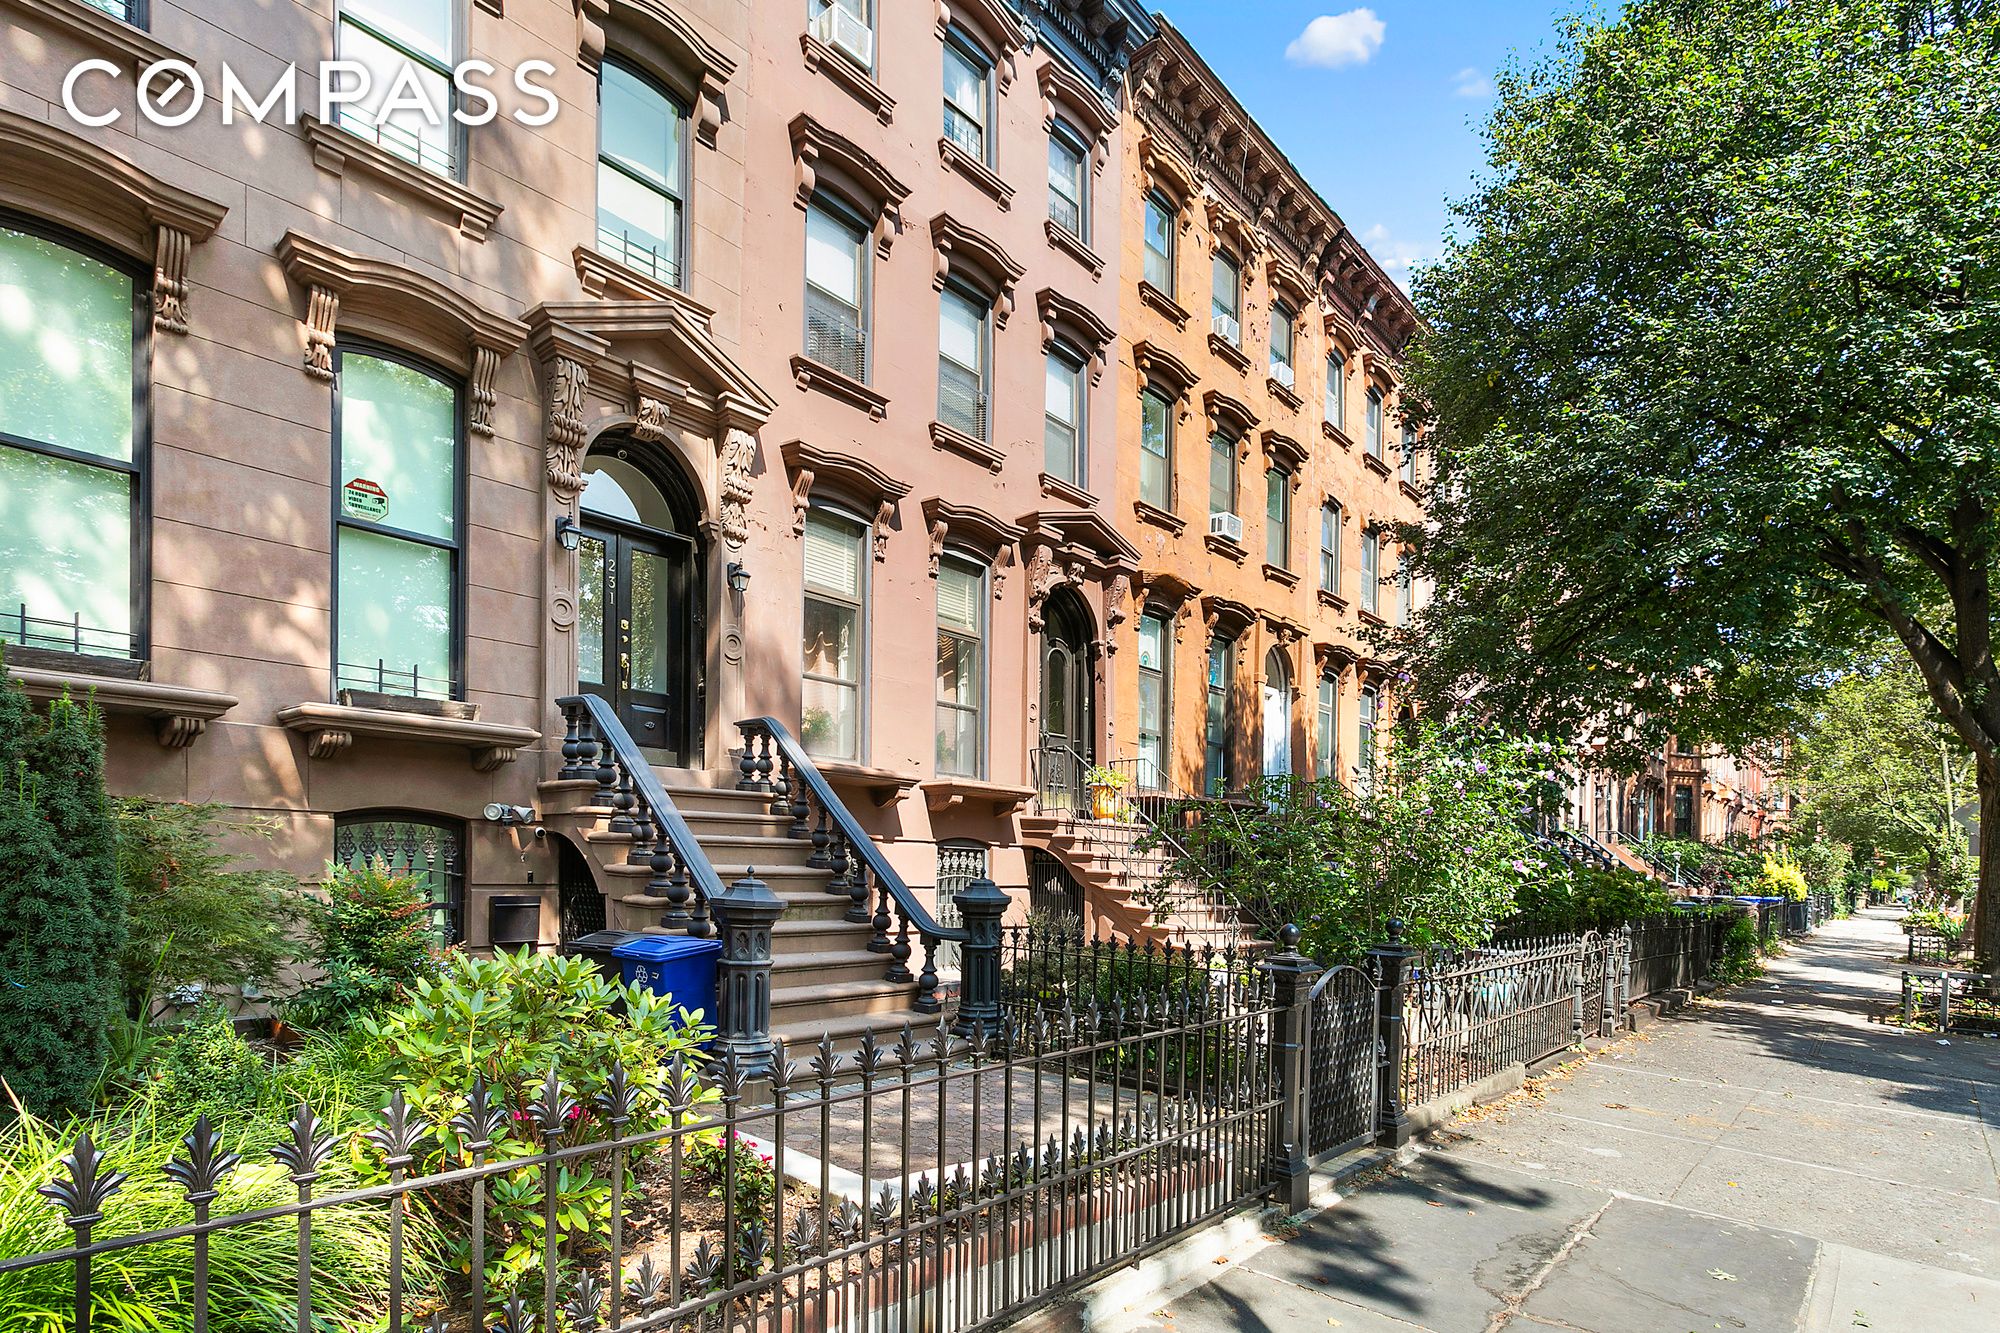 Nestled in the Landmark Stuyvesant Heights Historic District, 223 MacDonough Street is a grand townhouse (20 x 40 ft on a 100 ft lot) that was built in 1872 and comes with a rare 3-story extension (12 x 16 ft) that was added in 1918 creating over 4,100 sf of living space.
This property has no certificate of occupancy but is currently used as a 3-family with an upper duplex and 2 separate apartments on the parlor floor and garden floor.
This residence retains some original details such as original plaster work, pocket doors, crown moldings and five decorative fireplaces. 
The garden level apartment comes with 2 bedrooms and 1 bathroom and has direct access to the quiet, lush, and designed garden paved with bluestone. The parlor floor comes with 1 bedroom and 1 bathroom. This is an open space with high ceilings (11 feet), crown moldings, a decorative marble fireplace, oversized South facing windows and a large bedroom in the extension.
The upper duplex is bright and spacious and comes with 4 bedrooms and 2 bathrooms. 
The kitchen is open on the dining and living room with an office space in the alcove and an art studio in the extension. There are 3 bedrooms on the top floor with an additional full bathroom.
All 3 kitchens and 4 bathrooms in this property were renovated in 2018
This grand house could be easily converted into an owners' upper triplex over a garden rental apartment or into 2 separate duplexes.
While the property has been well maintained over the years, it needs a new roof, new windows and electrical upgrades.
This unique brownstone is located on a prime landmark block close to the A and C trains at Utica. The most reputable hot spots in Bed Stuy are just around the corner such as Saraghina, Lunatico, Peaches and L'Antagoniste among others.
223 MacDonough Street is part of a long row of fourteen houses built in the classic Italianate style. 
For over 50 years this building, along with 221 MacDonough Street, were the home of the Bedford Institute. 
This property is sold as is and is shown by appointment only.
A bank pre-approval letter or a proof of funds is required to schedule any showing.
The property is fully tenanted with an annual rent roll of $128,400
Email me if you have any further questions.